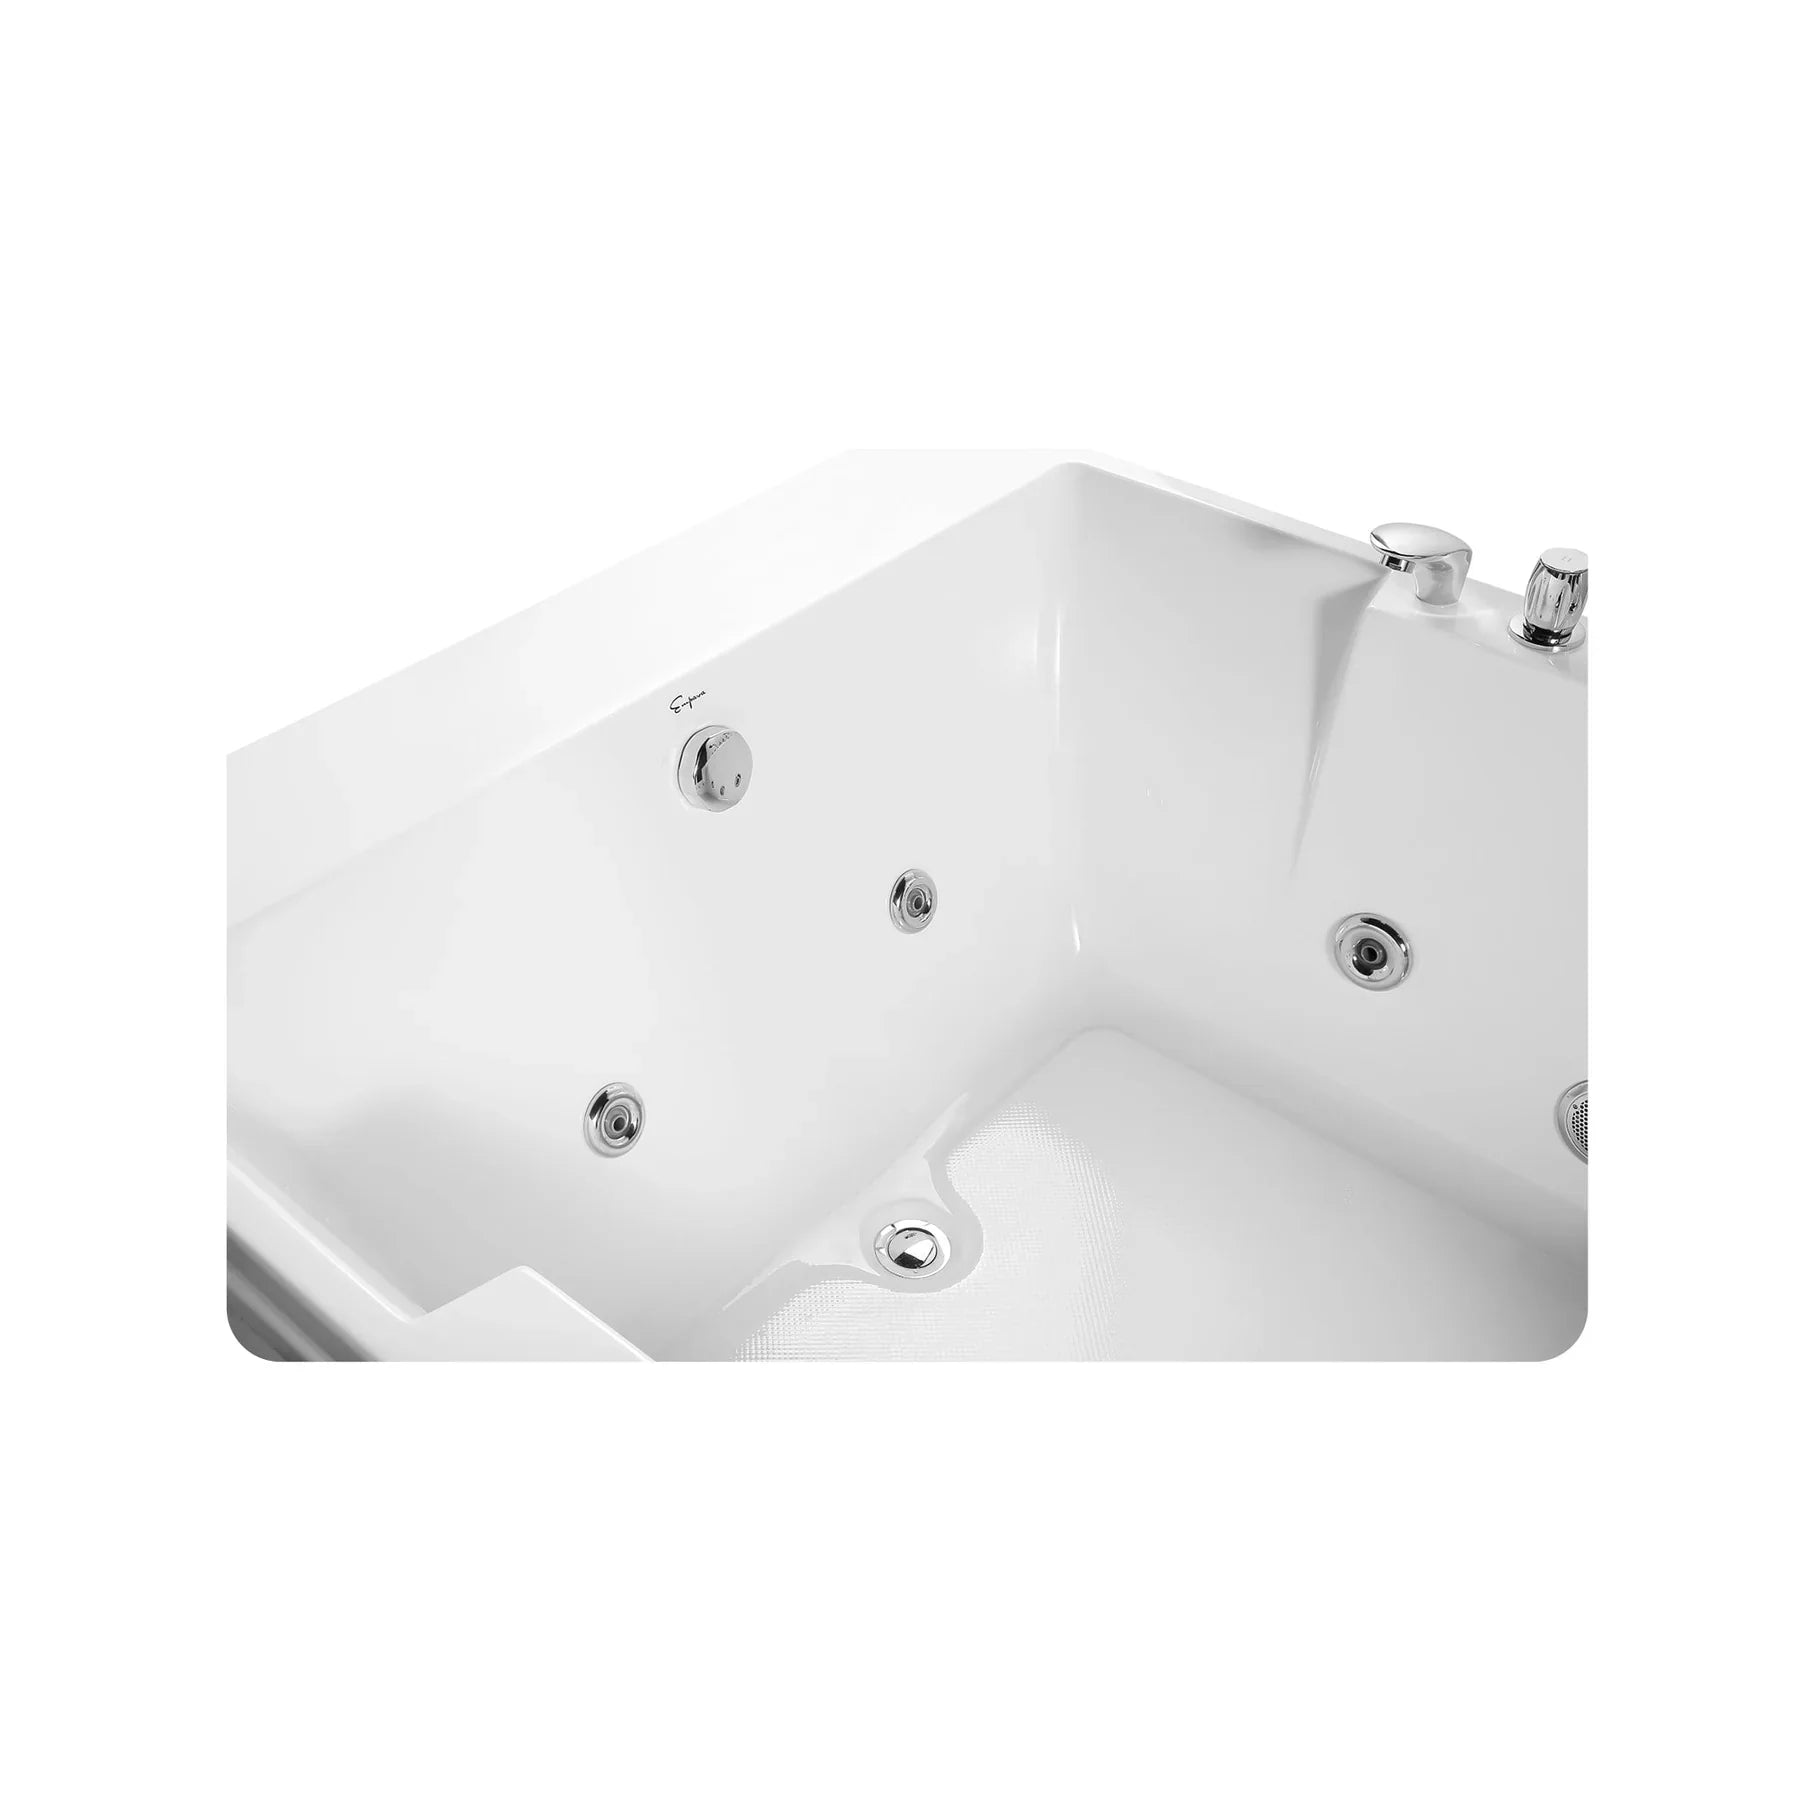 Empava 72 in. 2-Person Luxury Jetted Hydromassage Bathtub with LED Lights (72JT367LED)